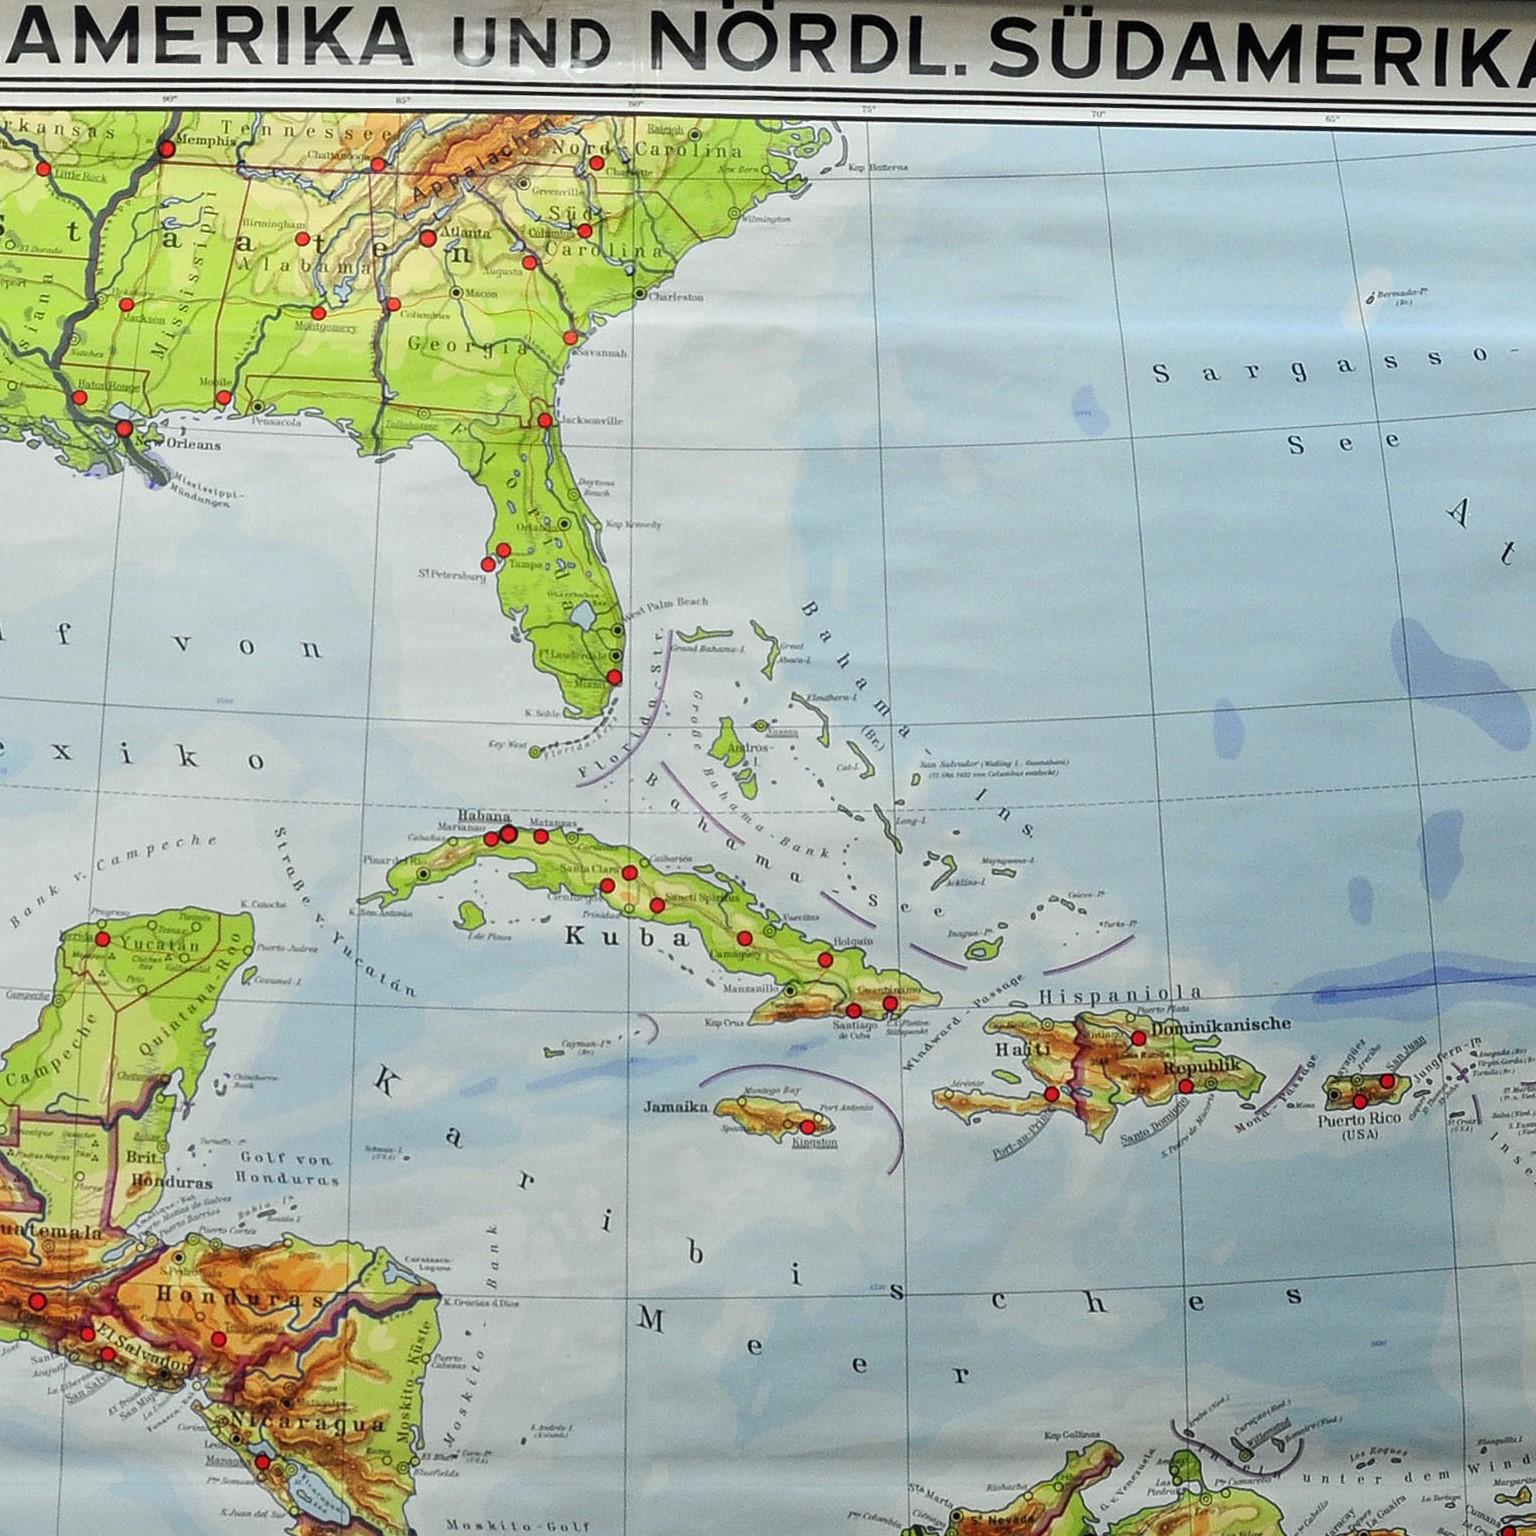 A fantastic pull-down wall chart depicting a map of Central America and Northern South America. Used as teaching material in German schools. Colorful print on paper reinforced with canvas. Published by Westermann circa 1968.
Measurements:
Width